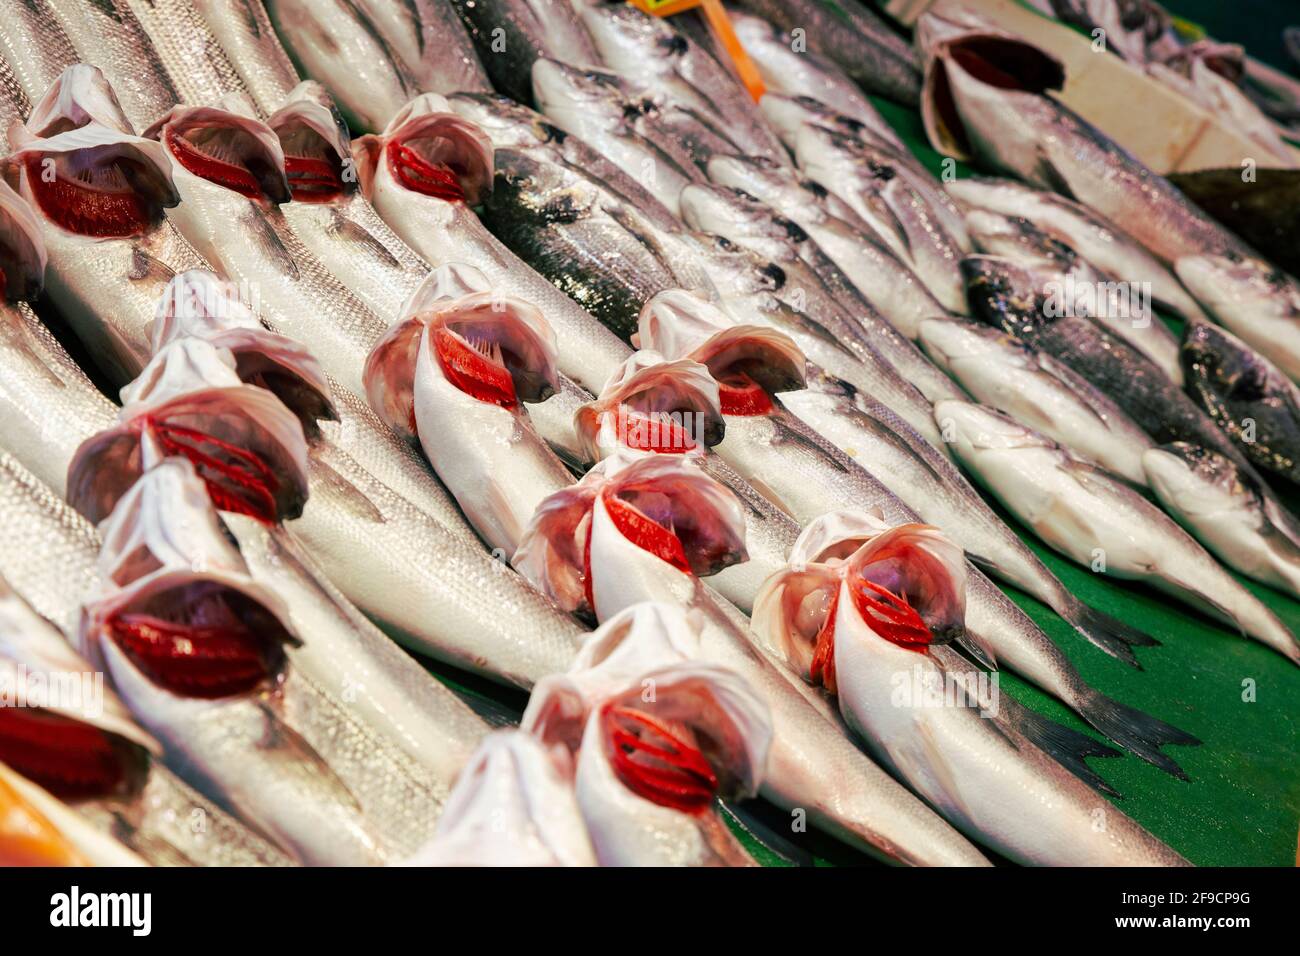 Full frame image of Mediterranean mackerel fish on counter, with open gills, red and fresh Stock Photo